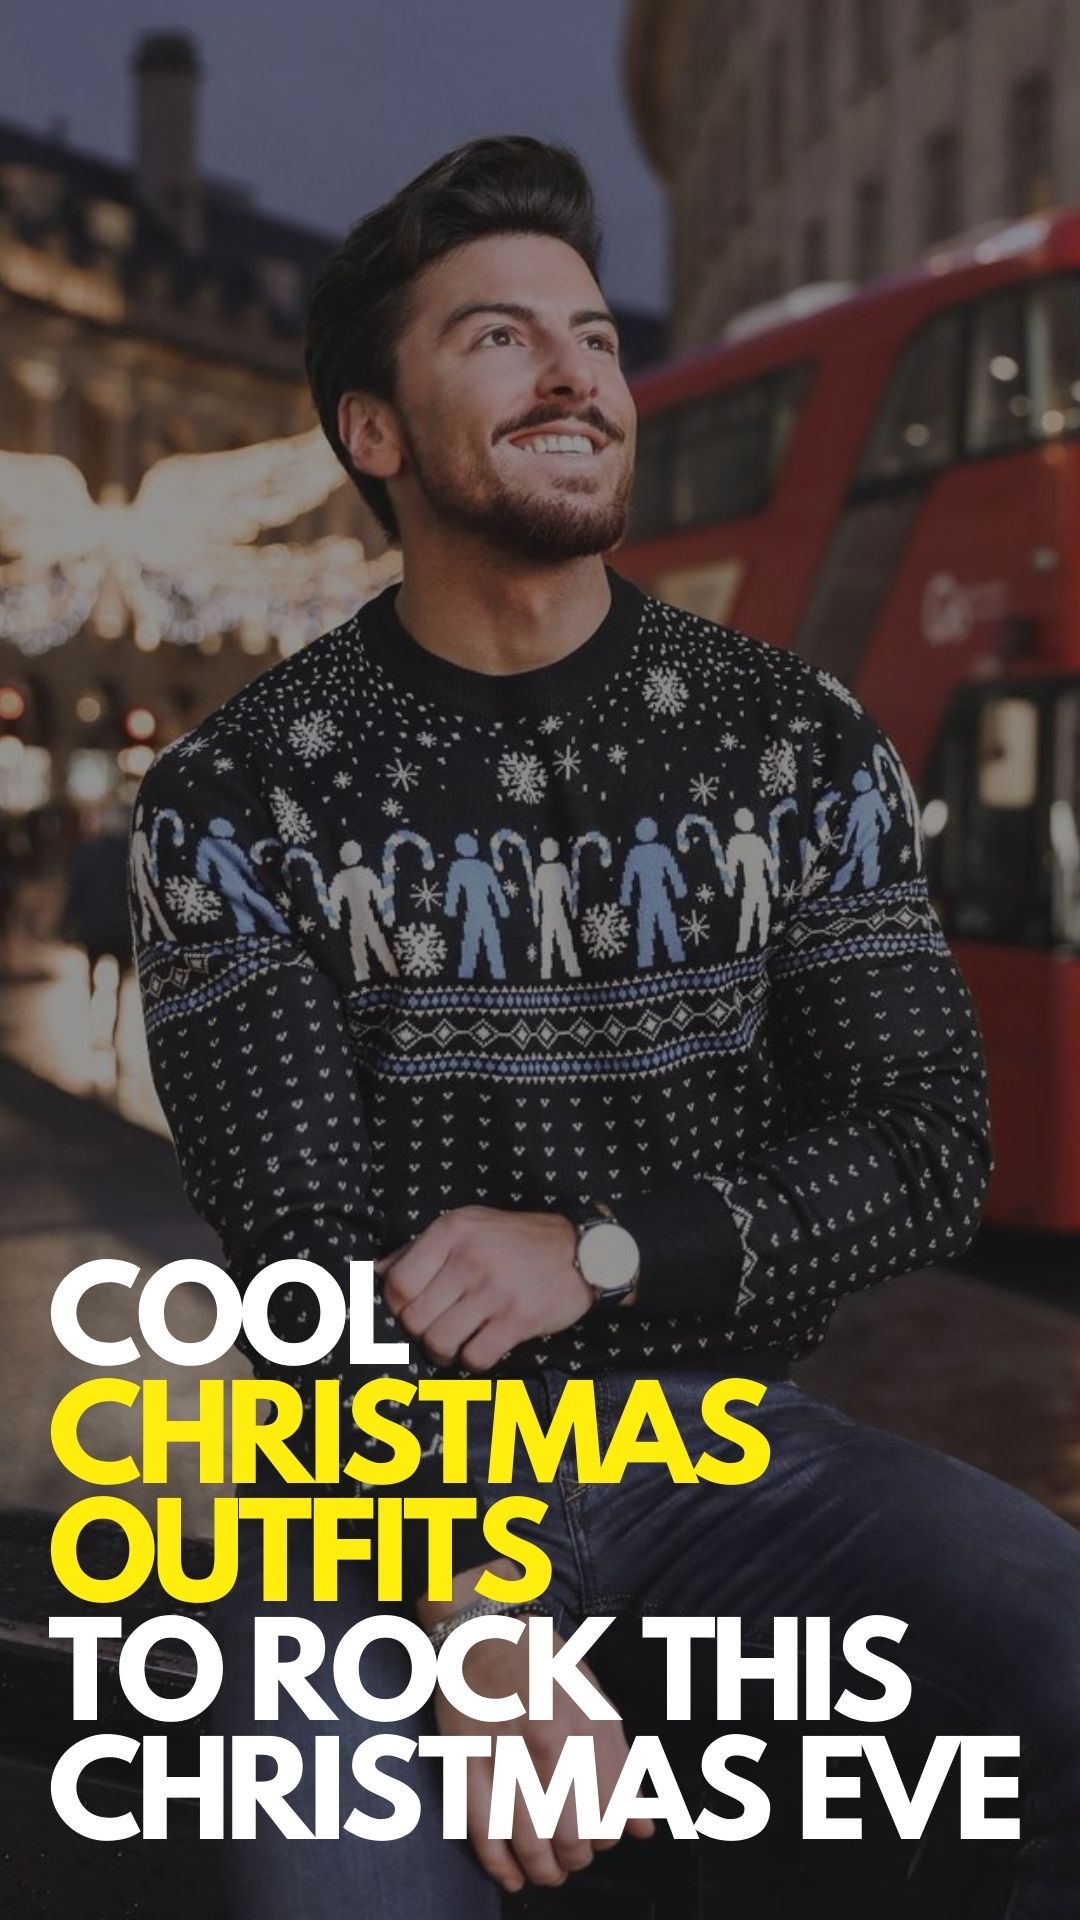 Cool Christmas outfit ideas to rock this christmas eve